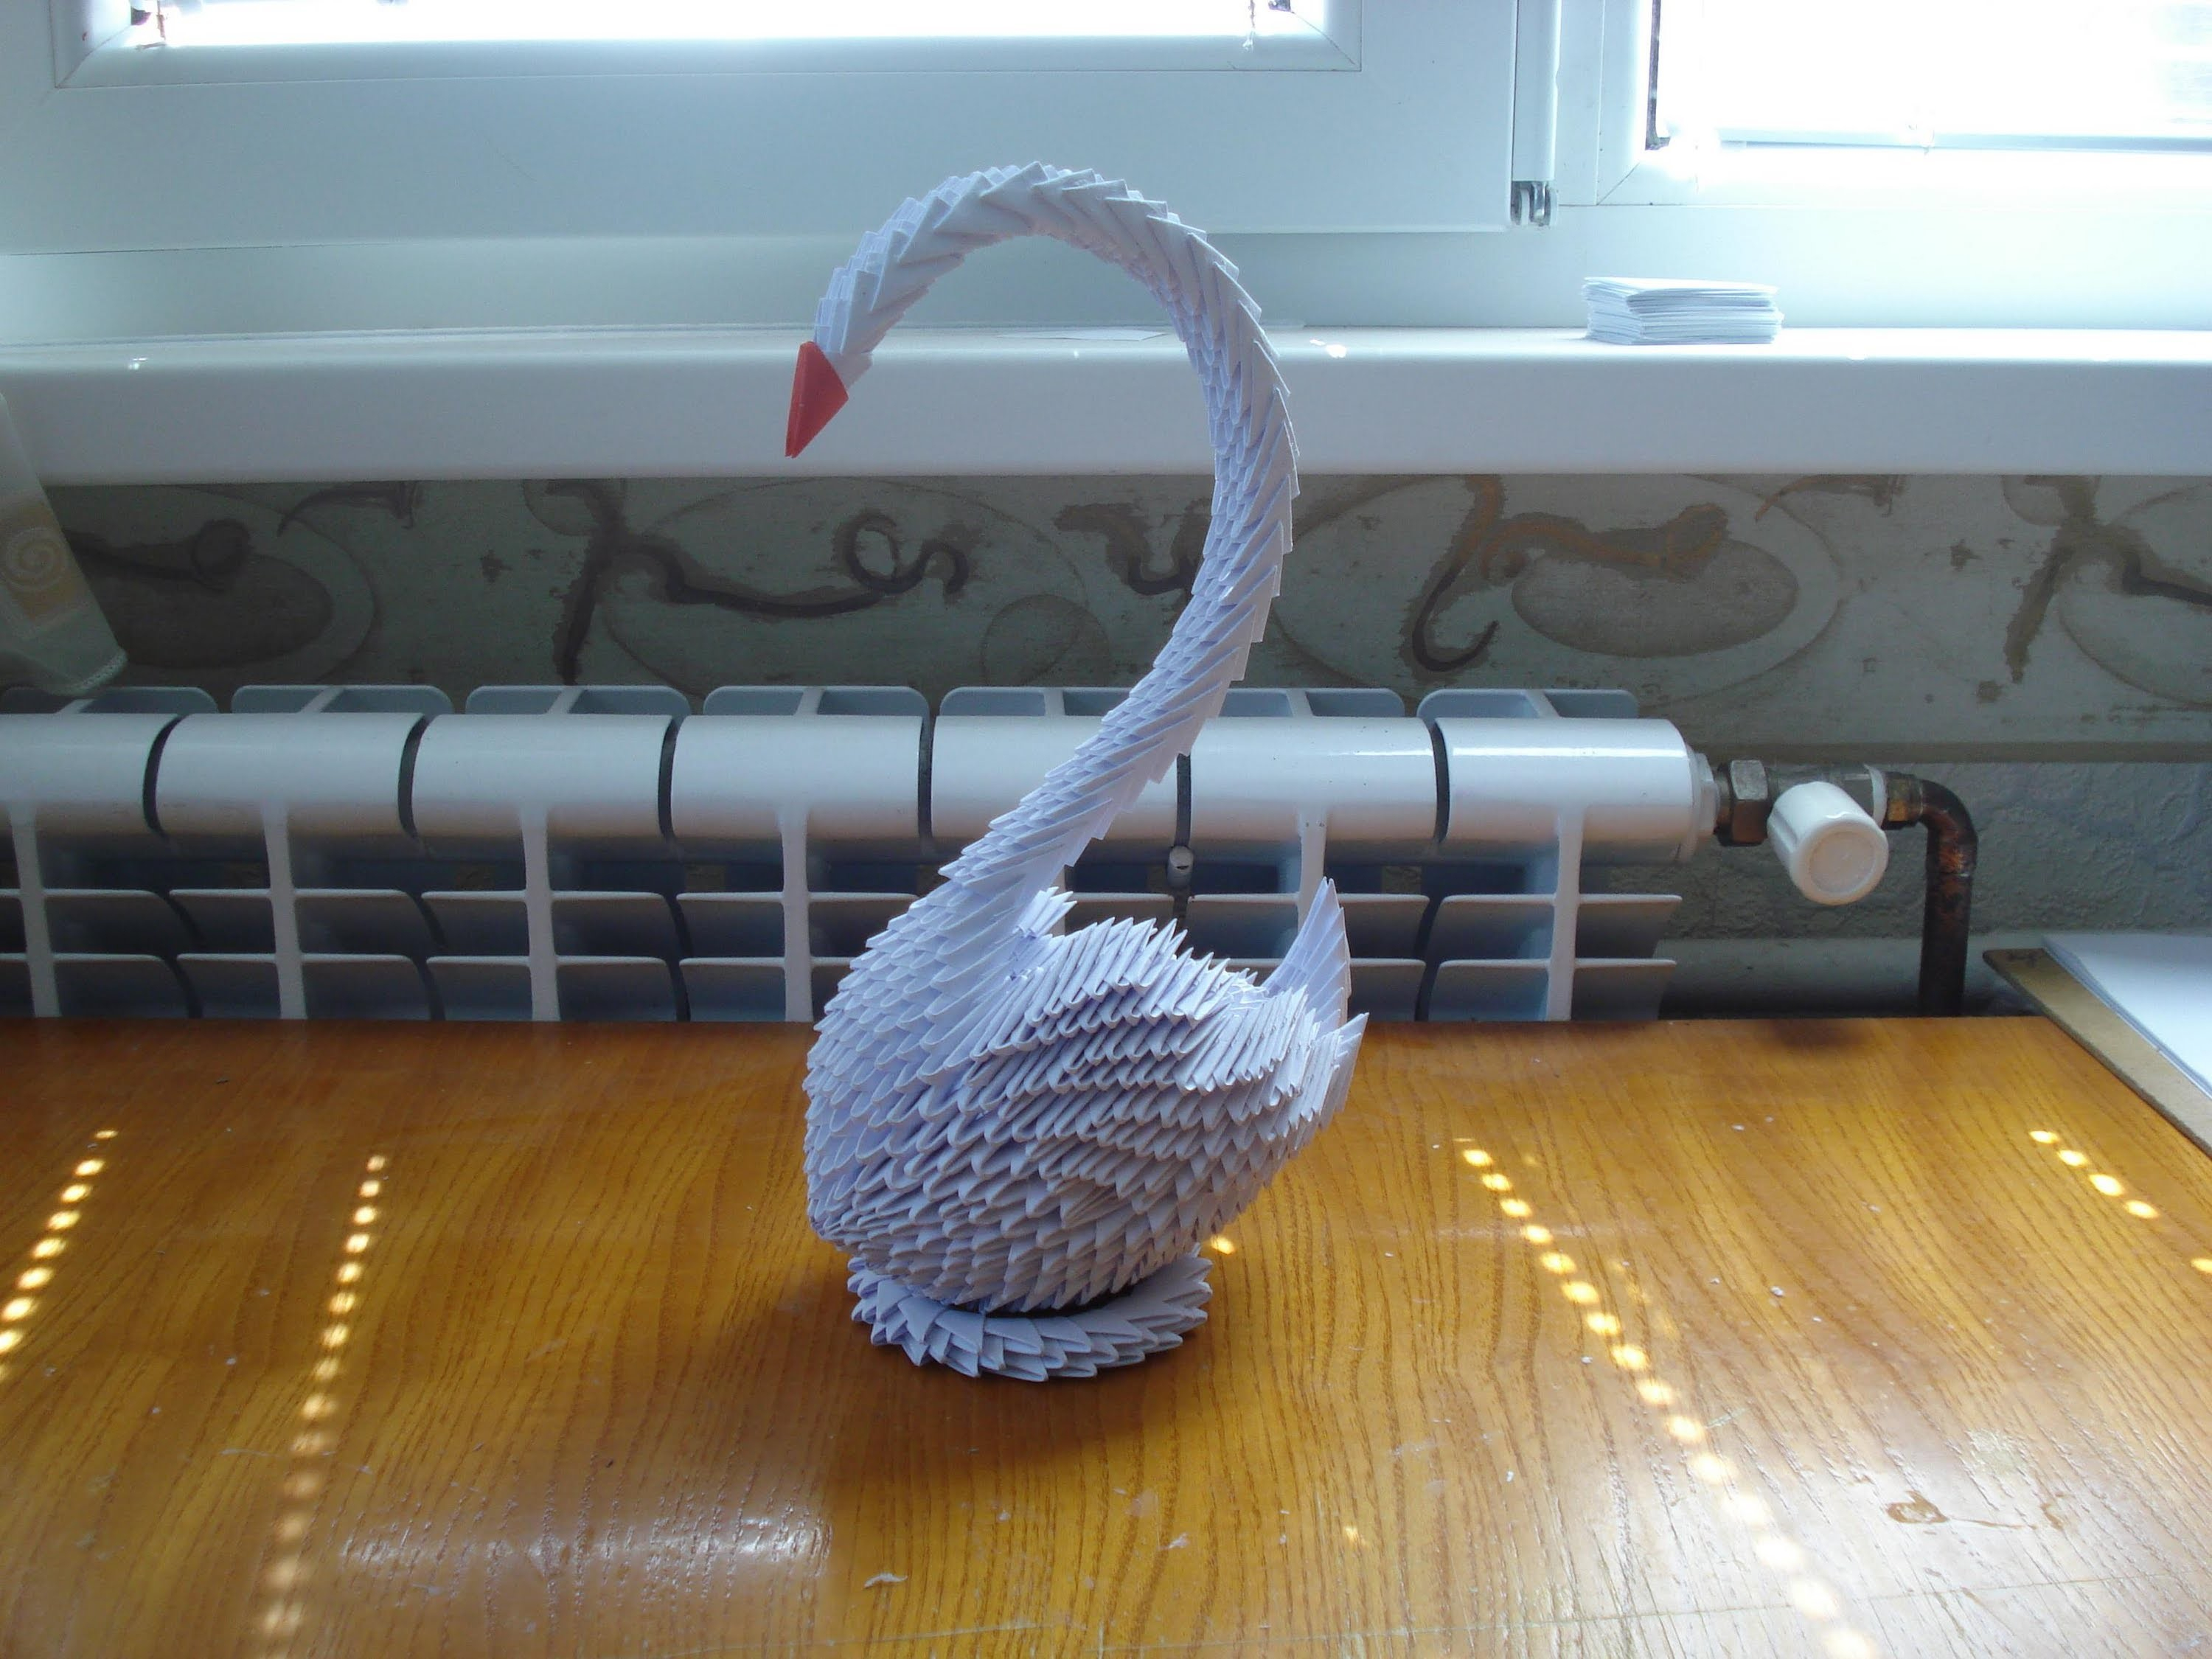 How To Make A Origami 3D Swan How To Make A 3d Origami Swan 2